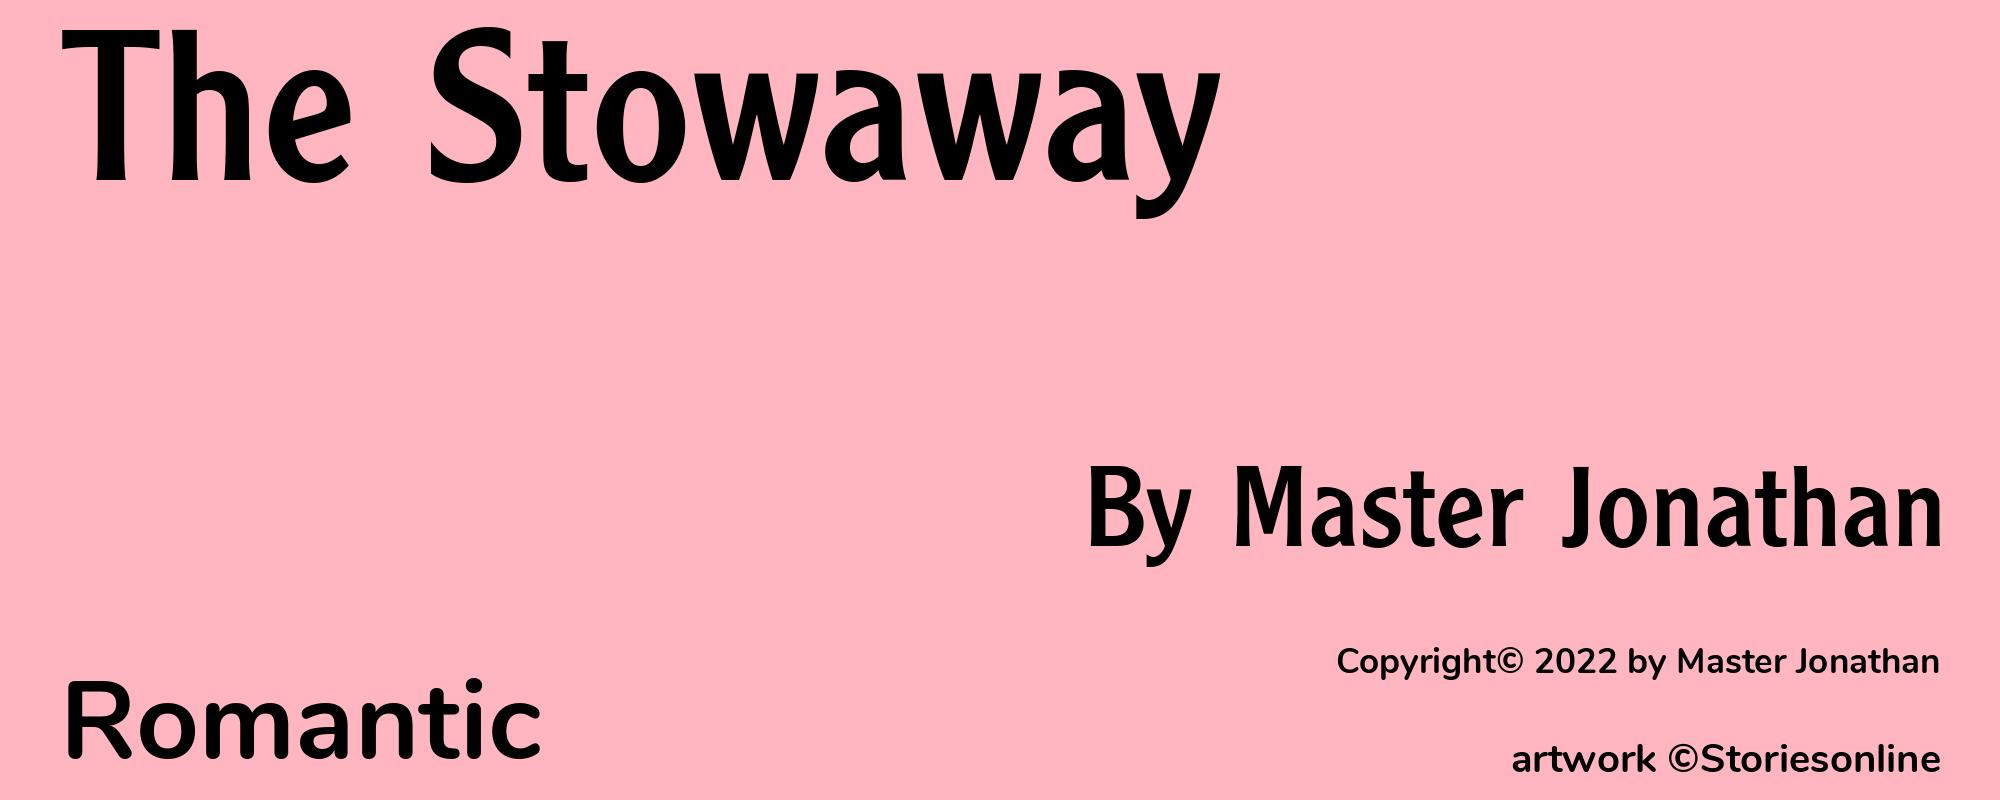 The Stowaway - Cover